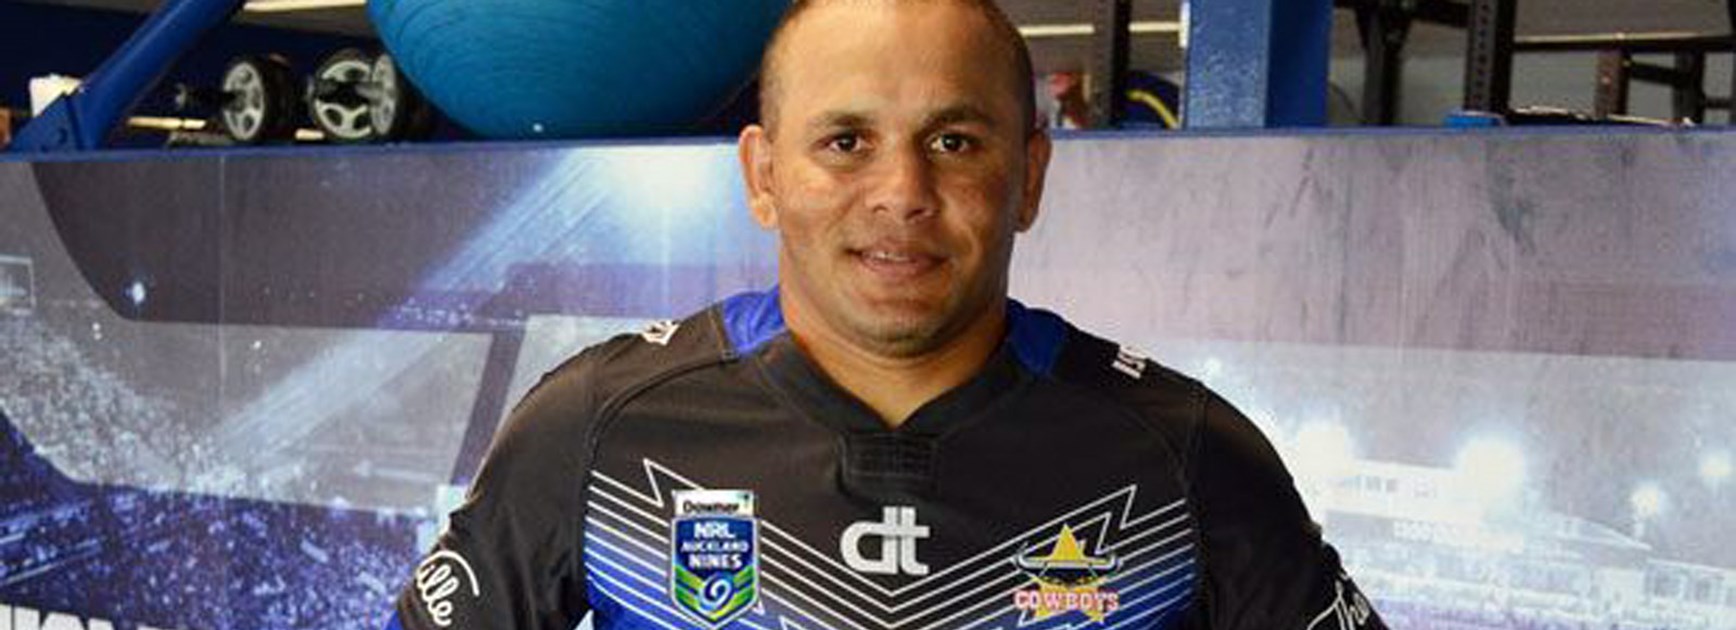 Matt Bowen will make his swansong appearance for the Cowboys at the 2016 Auckland Nines.